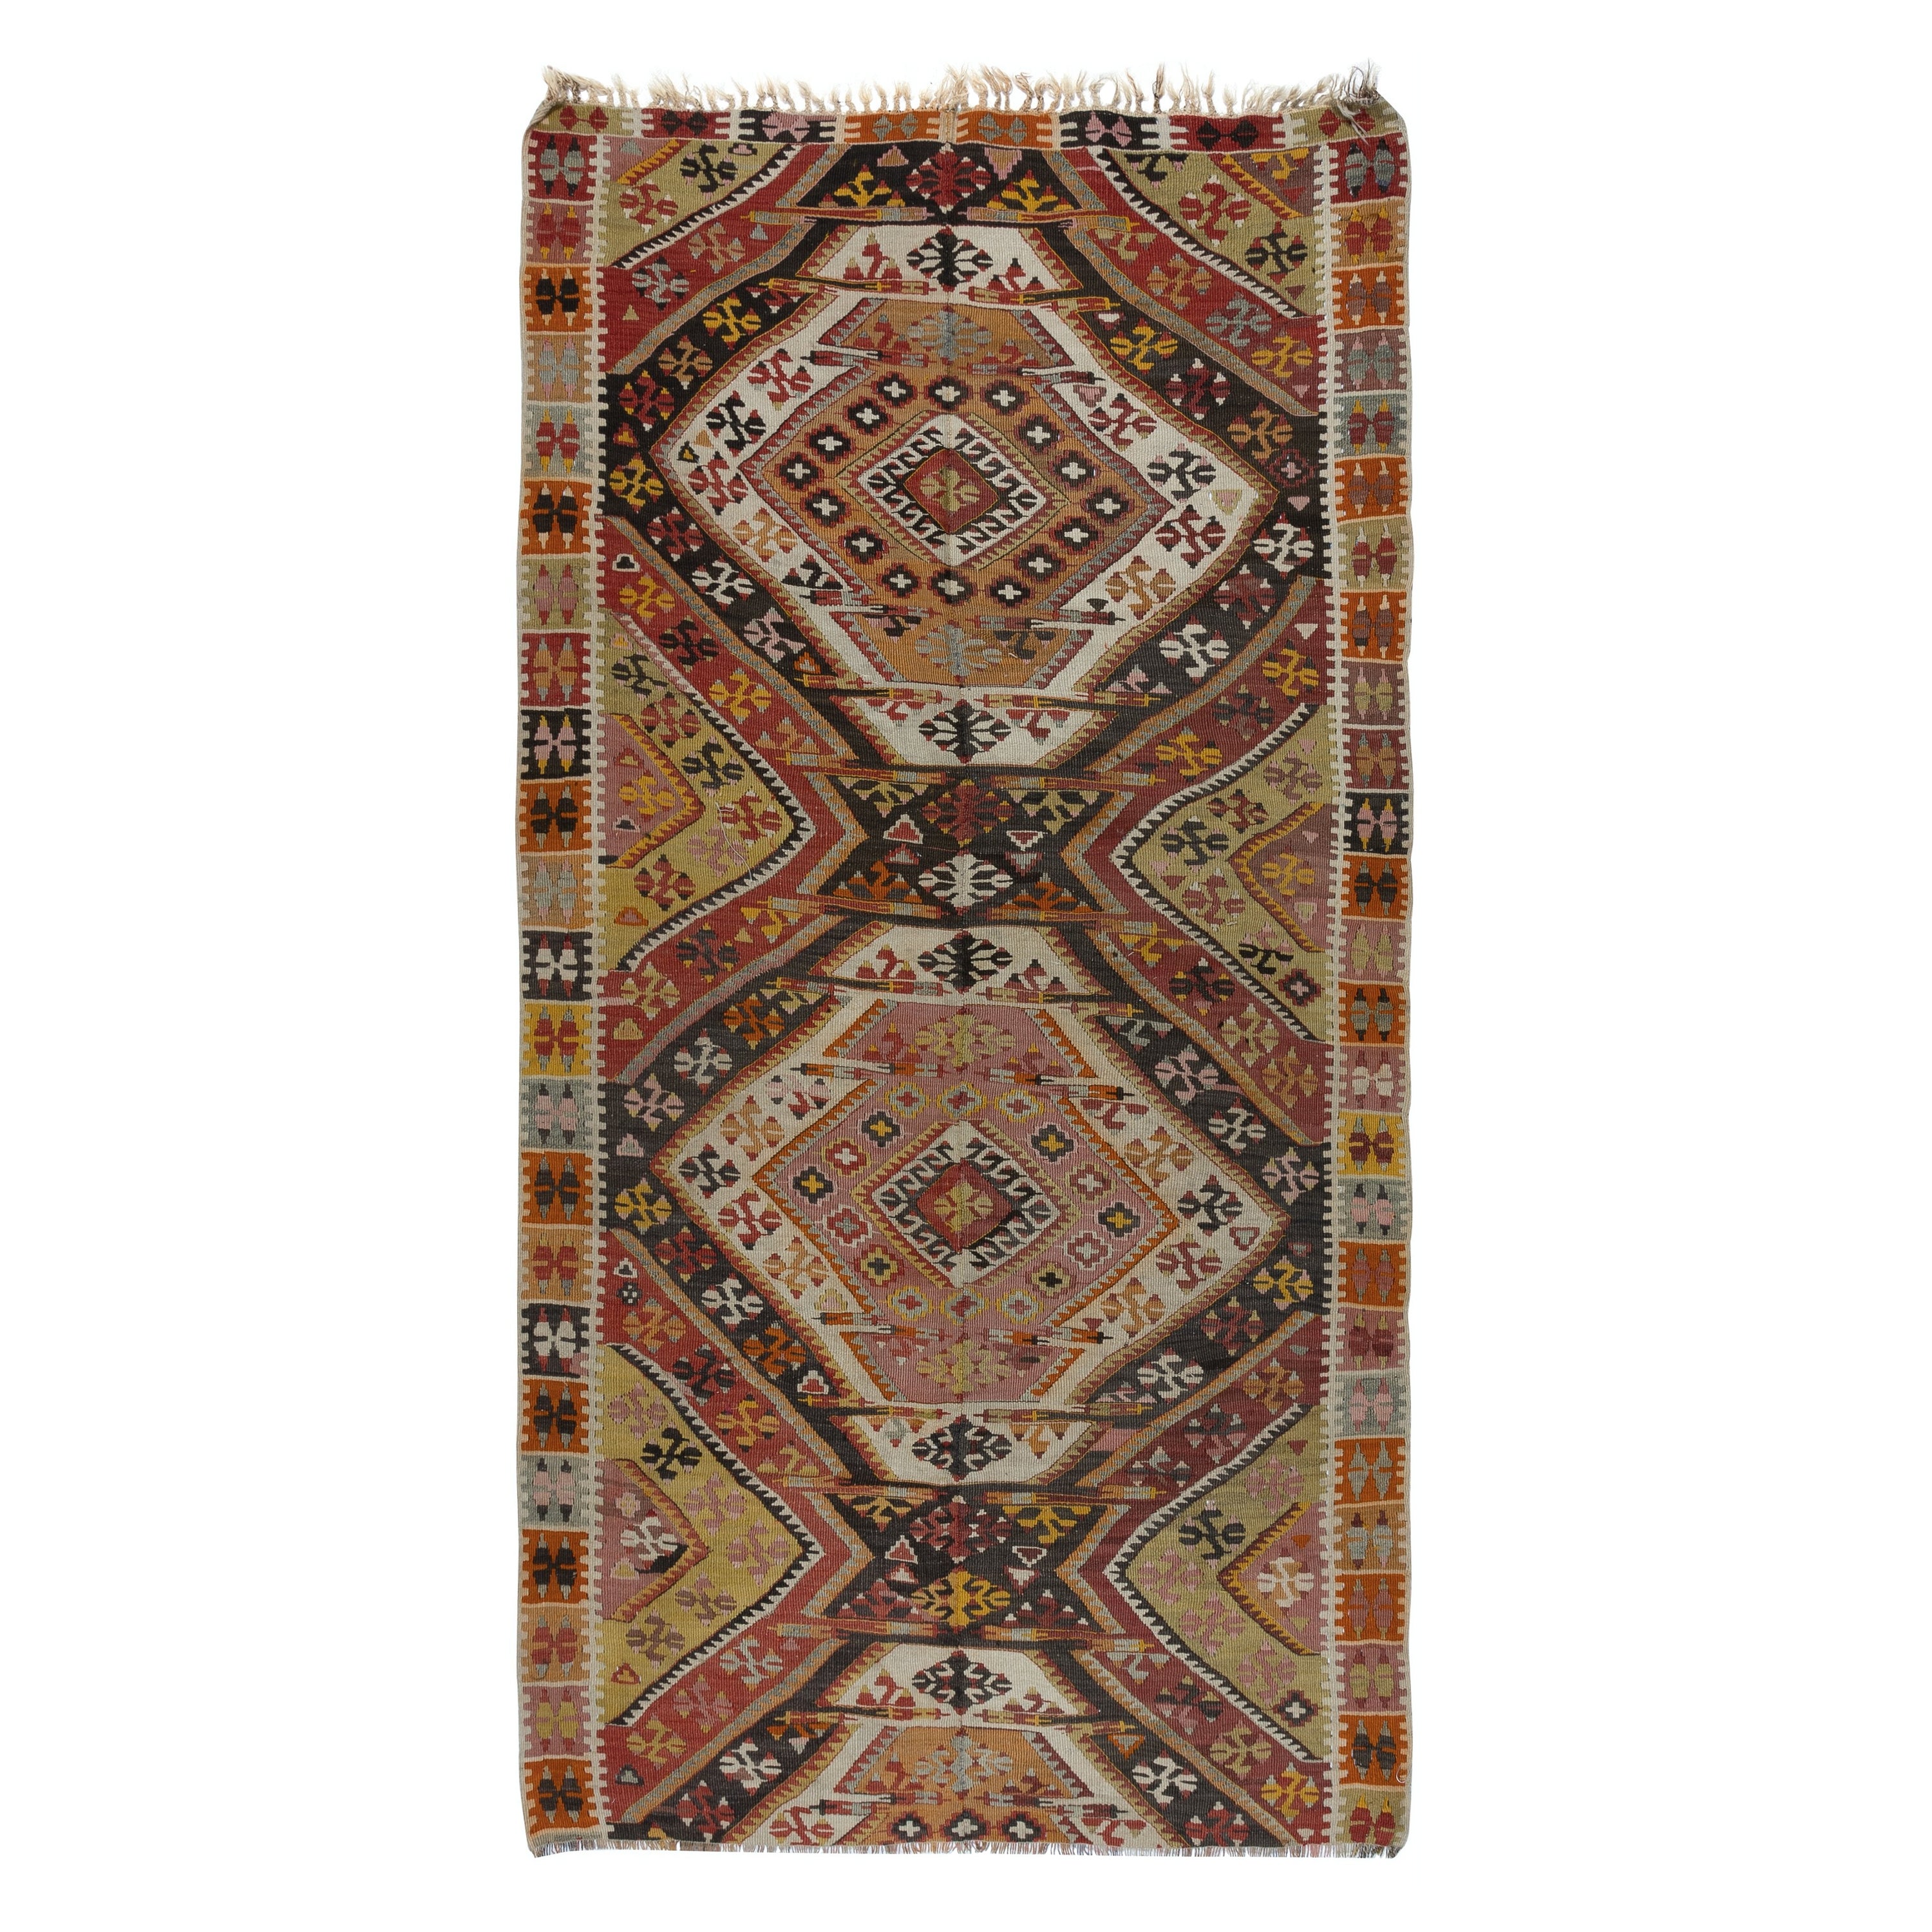 5x9.2 Ft Nomadic Vintage Anatolian Kilim, Flat-Weave Colorful Rug, All Wool For Sale